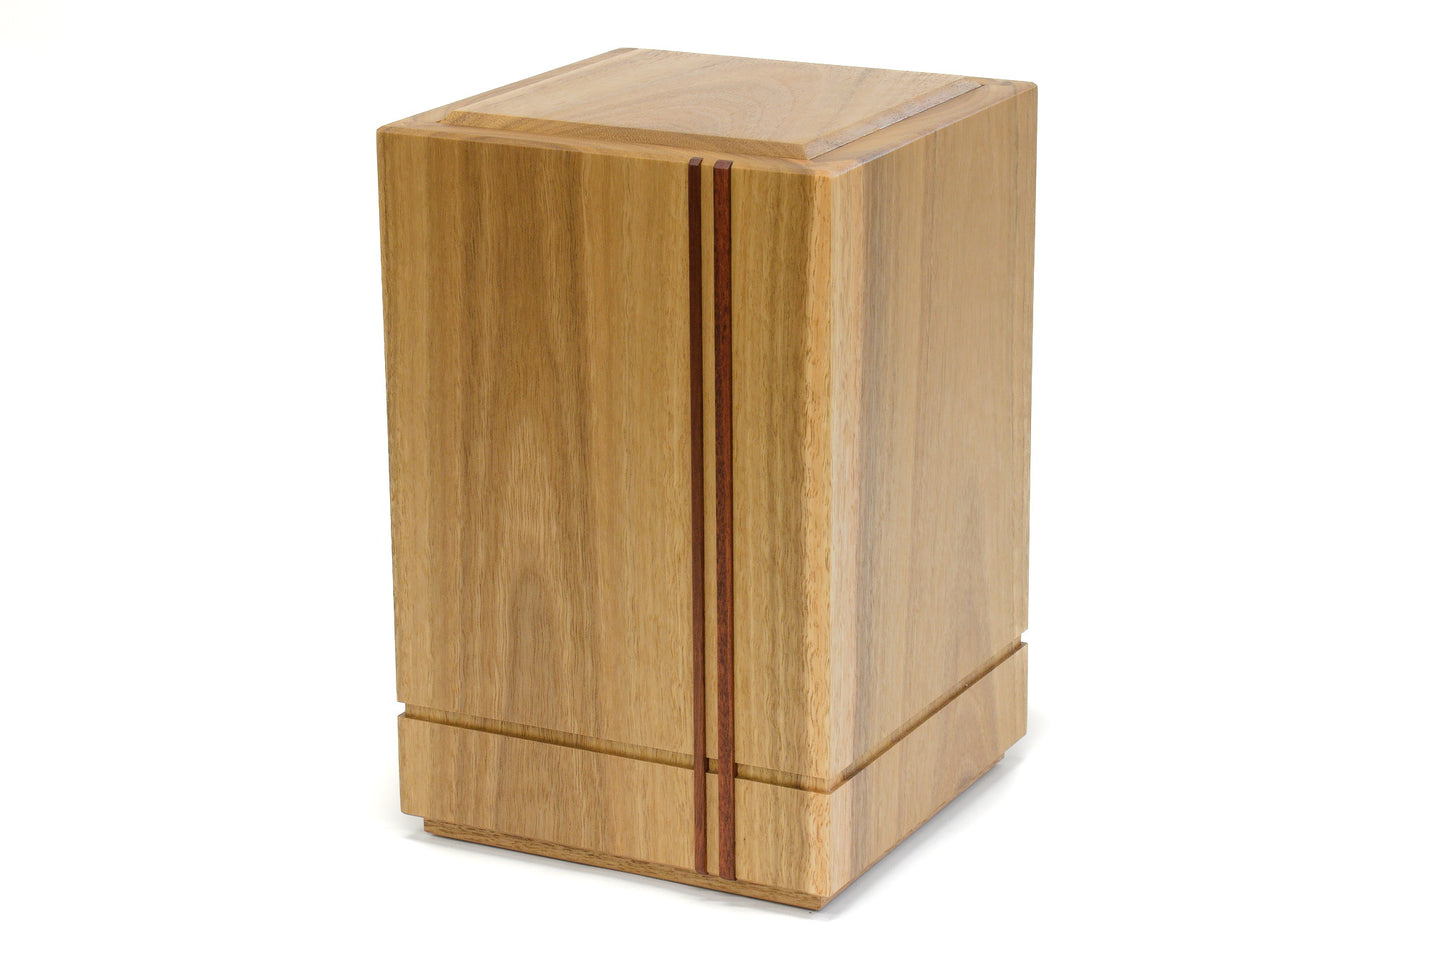 Wooden cremation urn handcrafted from Spotted Gum